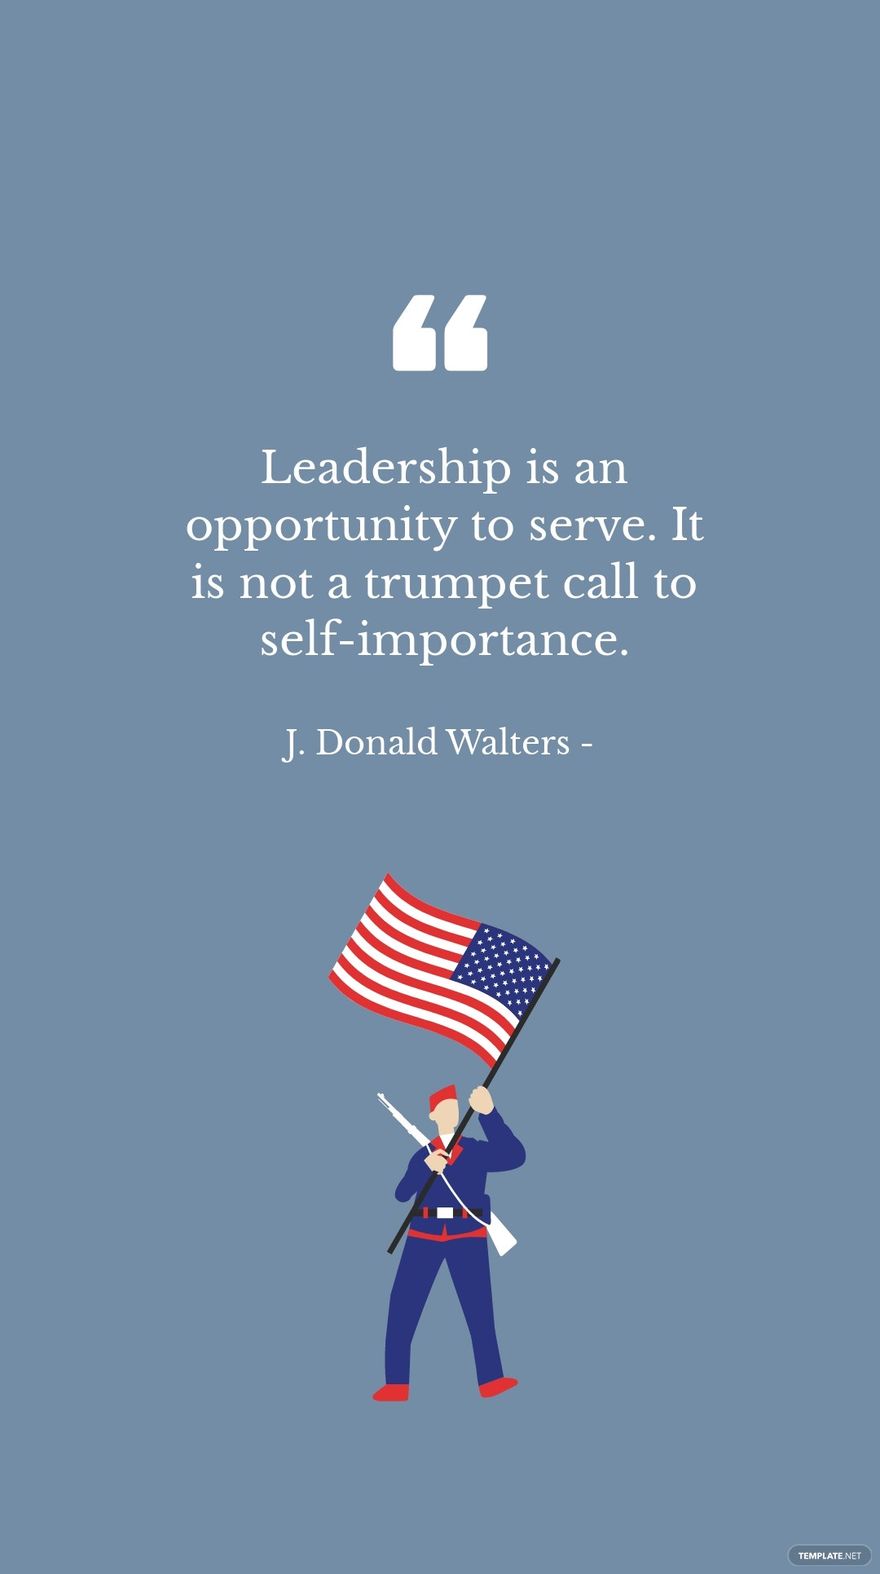 Free J. Donald Walters - Leadership is an opportunity to serve. It is not a trumpet call to self-importance. in JPG